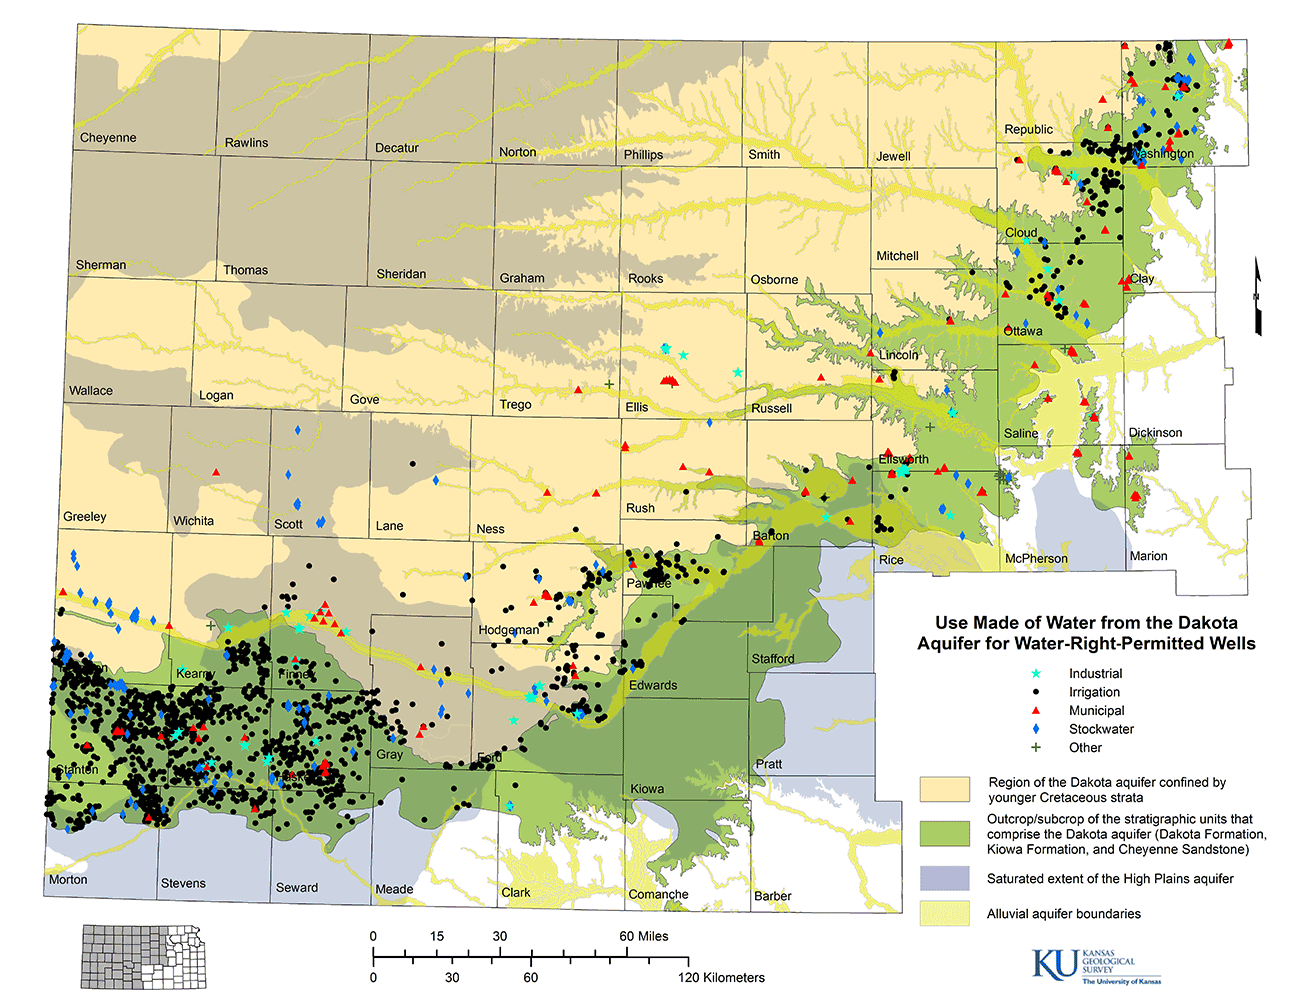 Distribution of water-right-permitted wells that draw part or all of their yield from the Dakota aquifer.